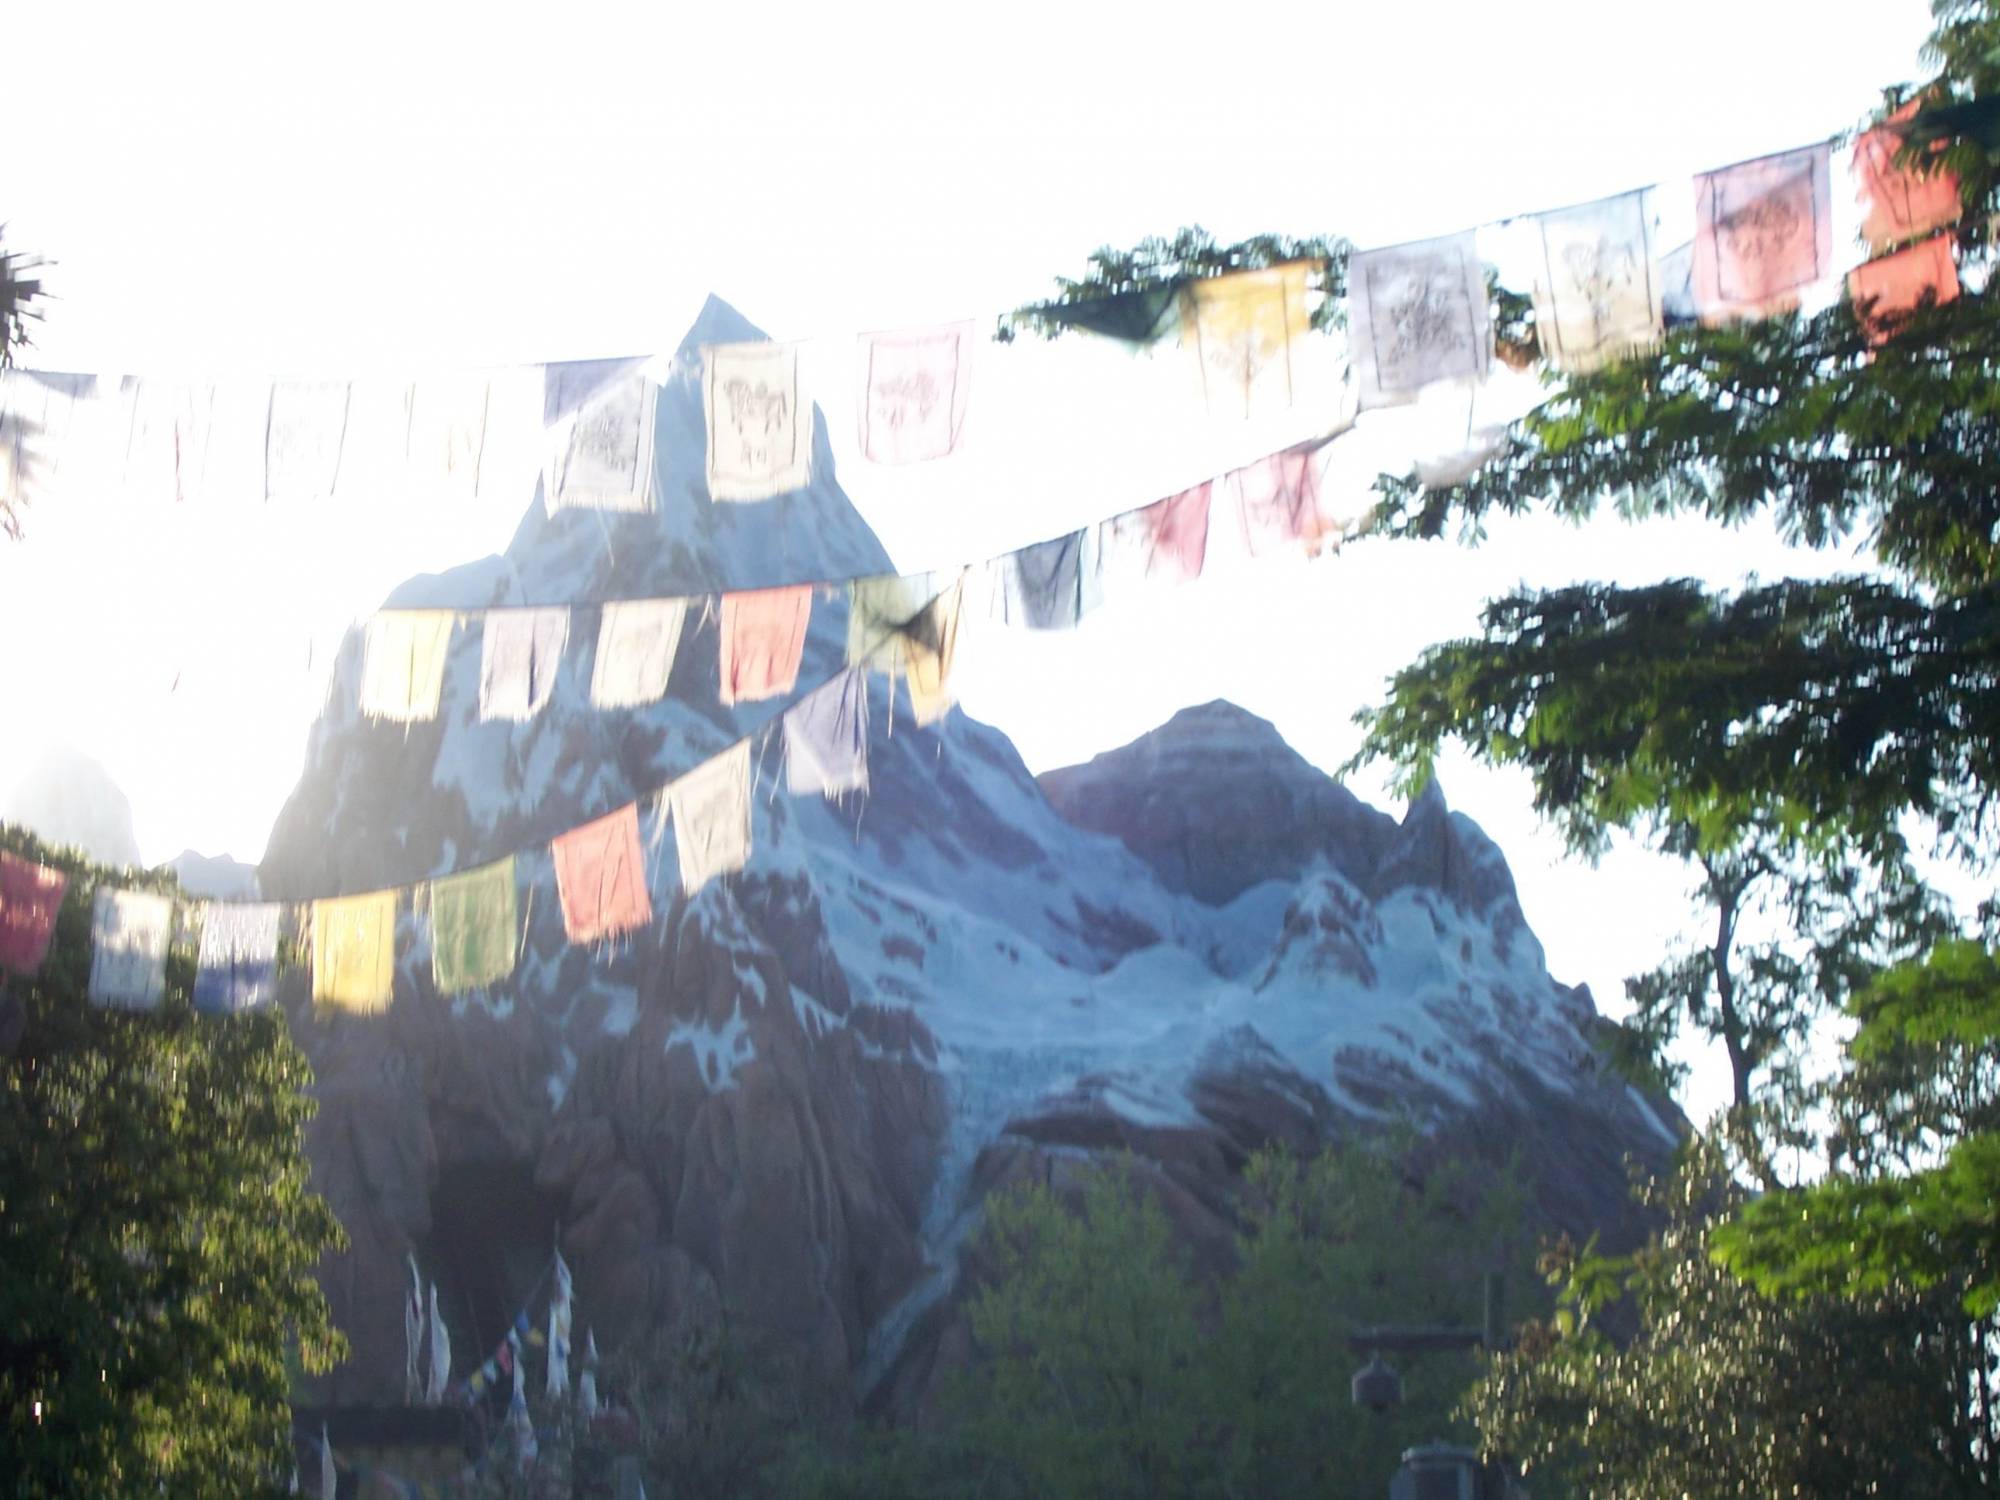 Expedition Everest From Asia Area